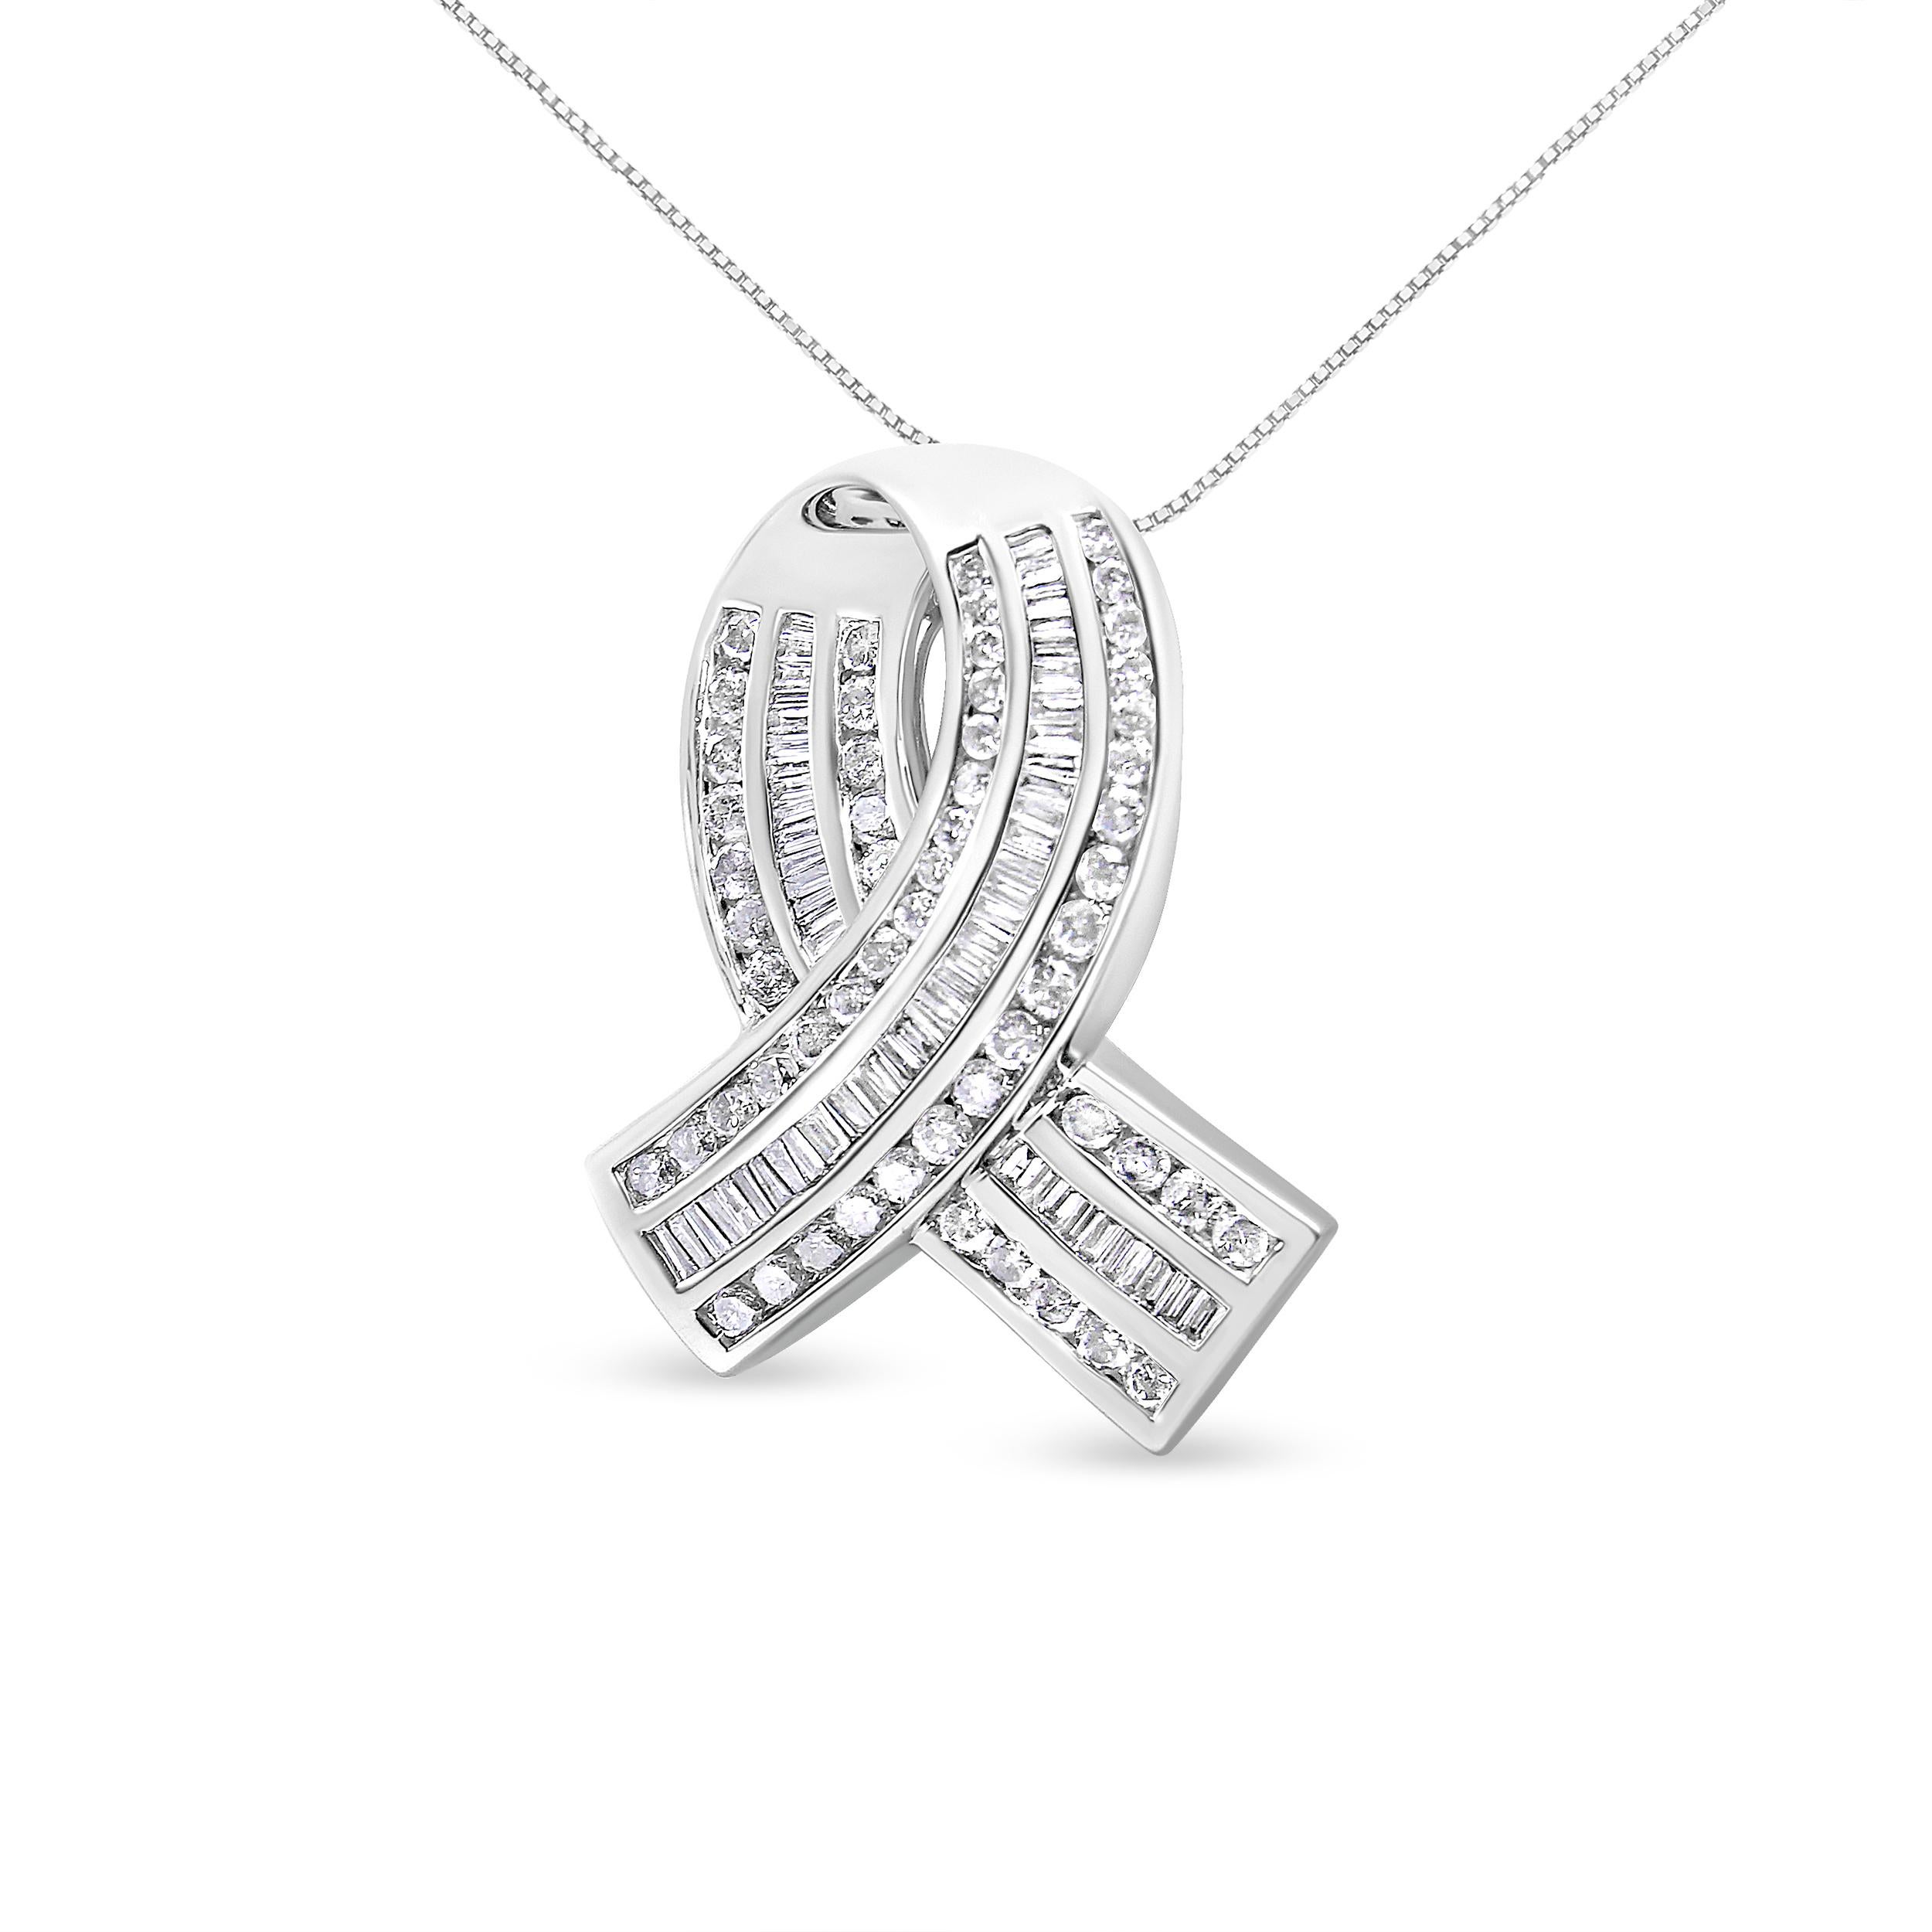 Raise awareness and show support with this diamond awareness pendant. The ribbon is a symbol of strength and support for those affected by cancer and other diseases, and this ribbon pendant is perfect for showing support or gifting to the strong